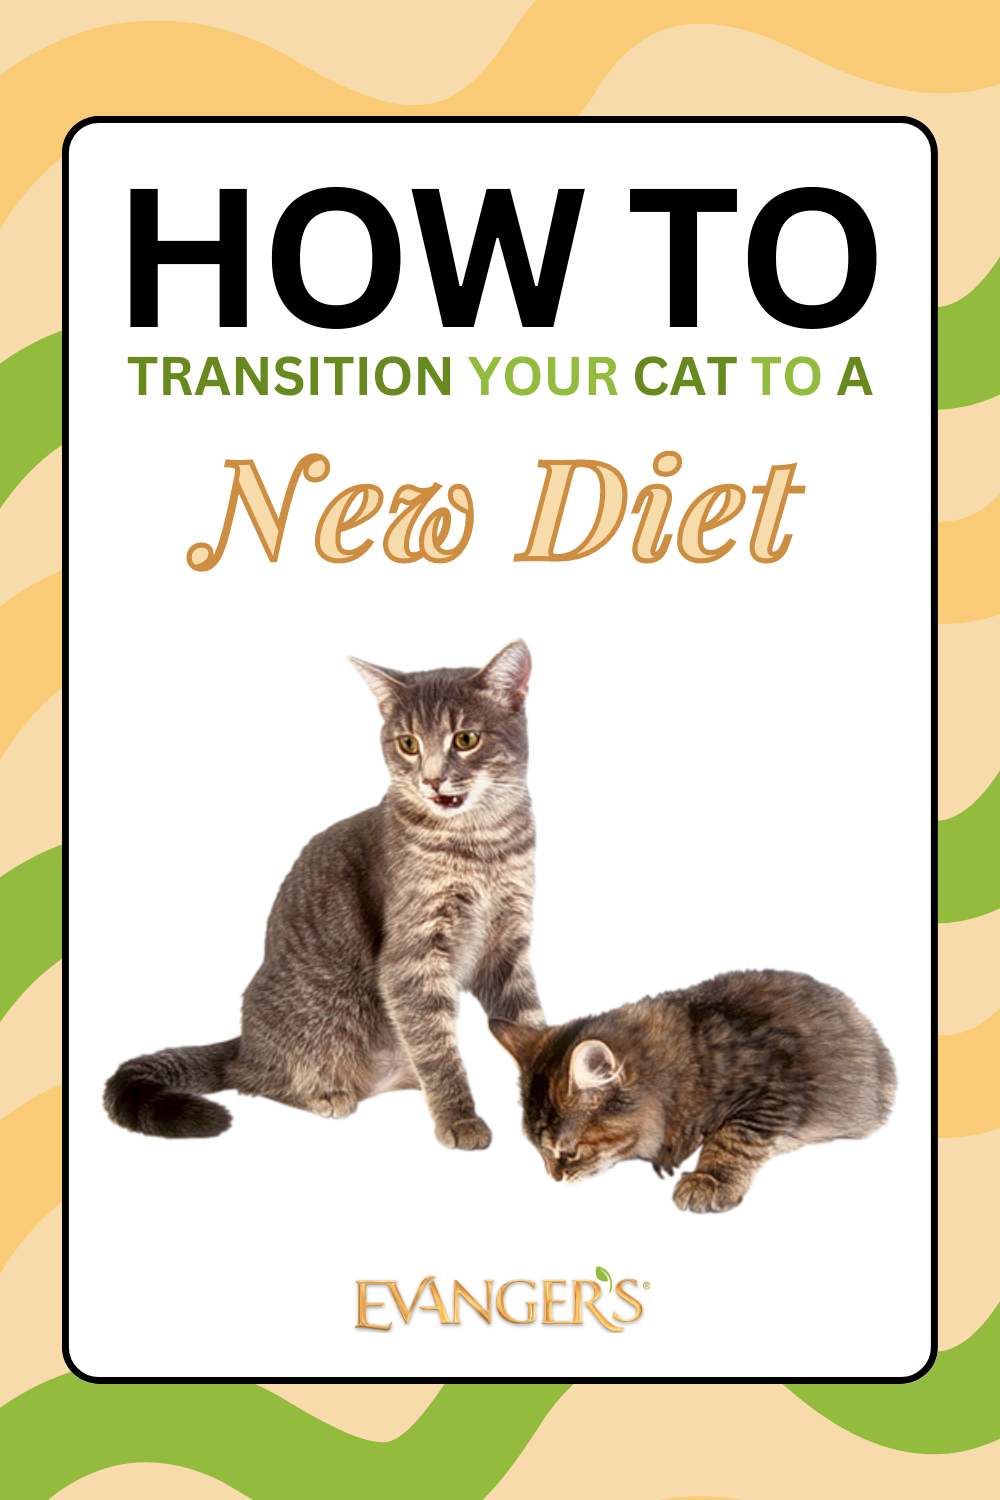 How to Transition Your Cat to a New Diet